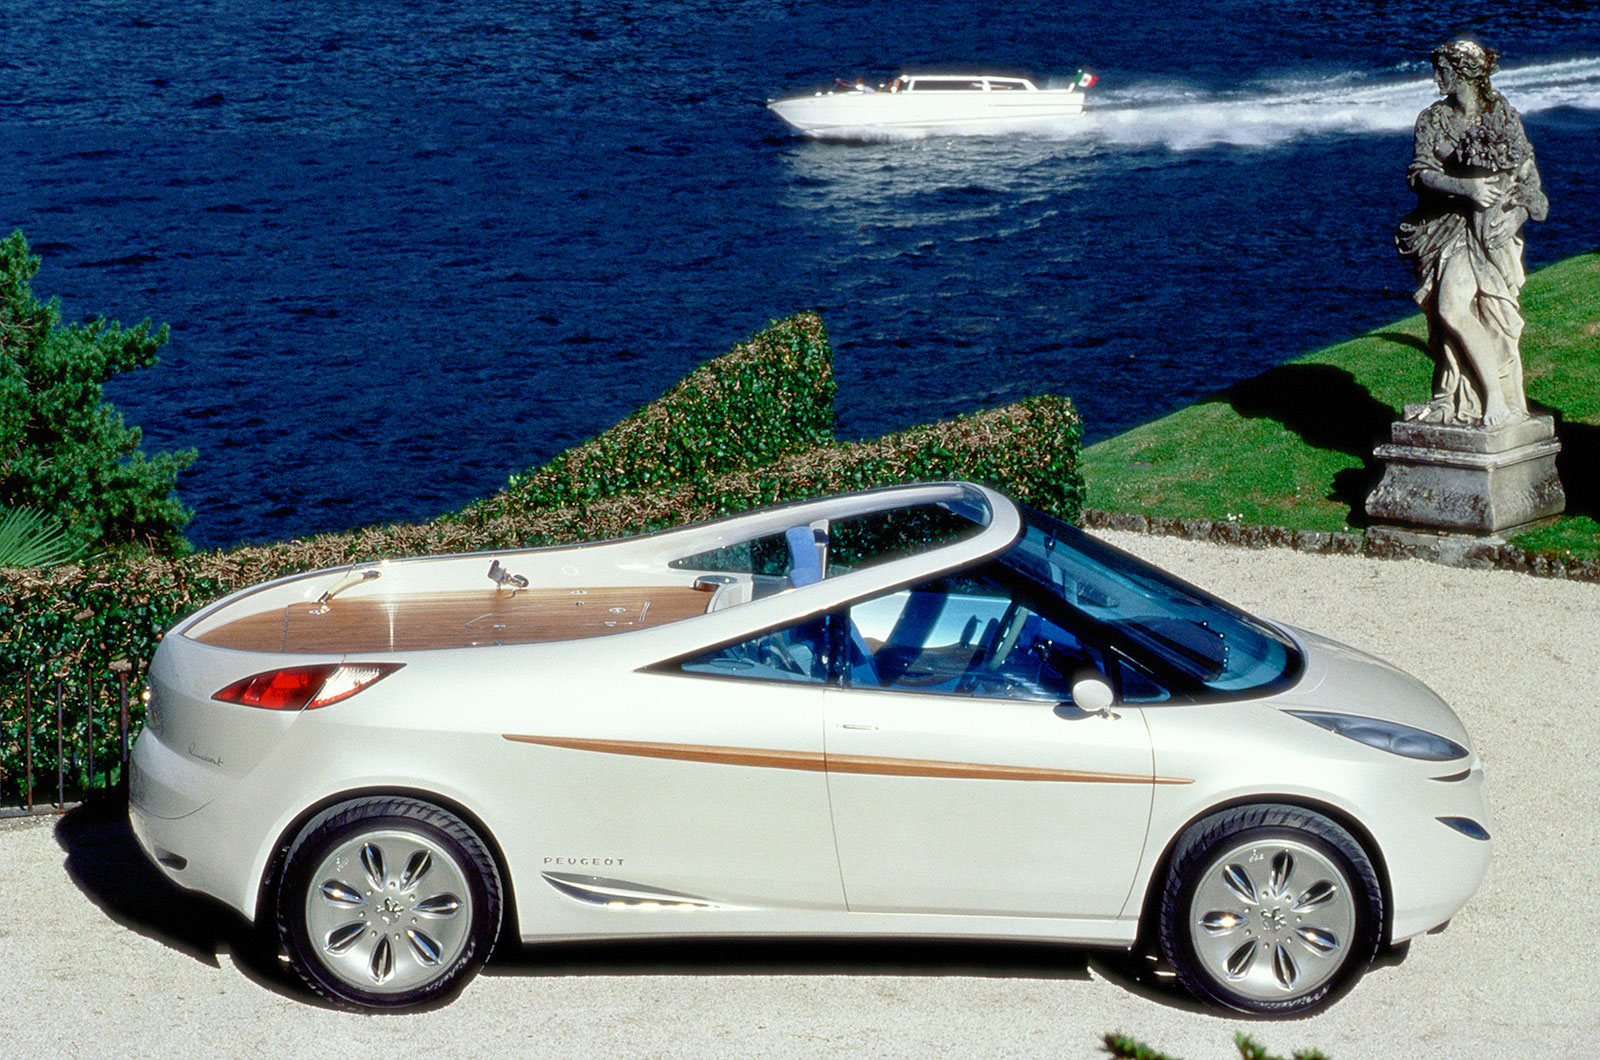 <p>People carriers often handle like a boat, but Peugeot got carried away with this theory when it created its 806 Runabout. Crossing its 806 people carrier with a speedboat, the Runabout was contrived and ridiculous – and those were among its better points. In the transformation to Runabout the 806 lost its people-carrying abilities as well as any semblance of practicality.</p>